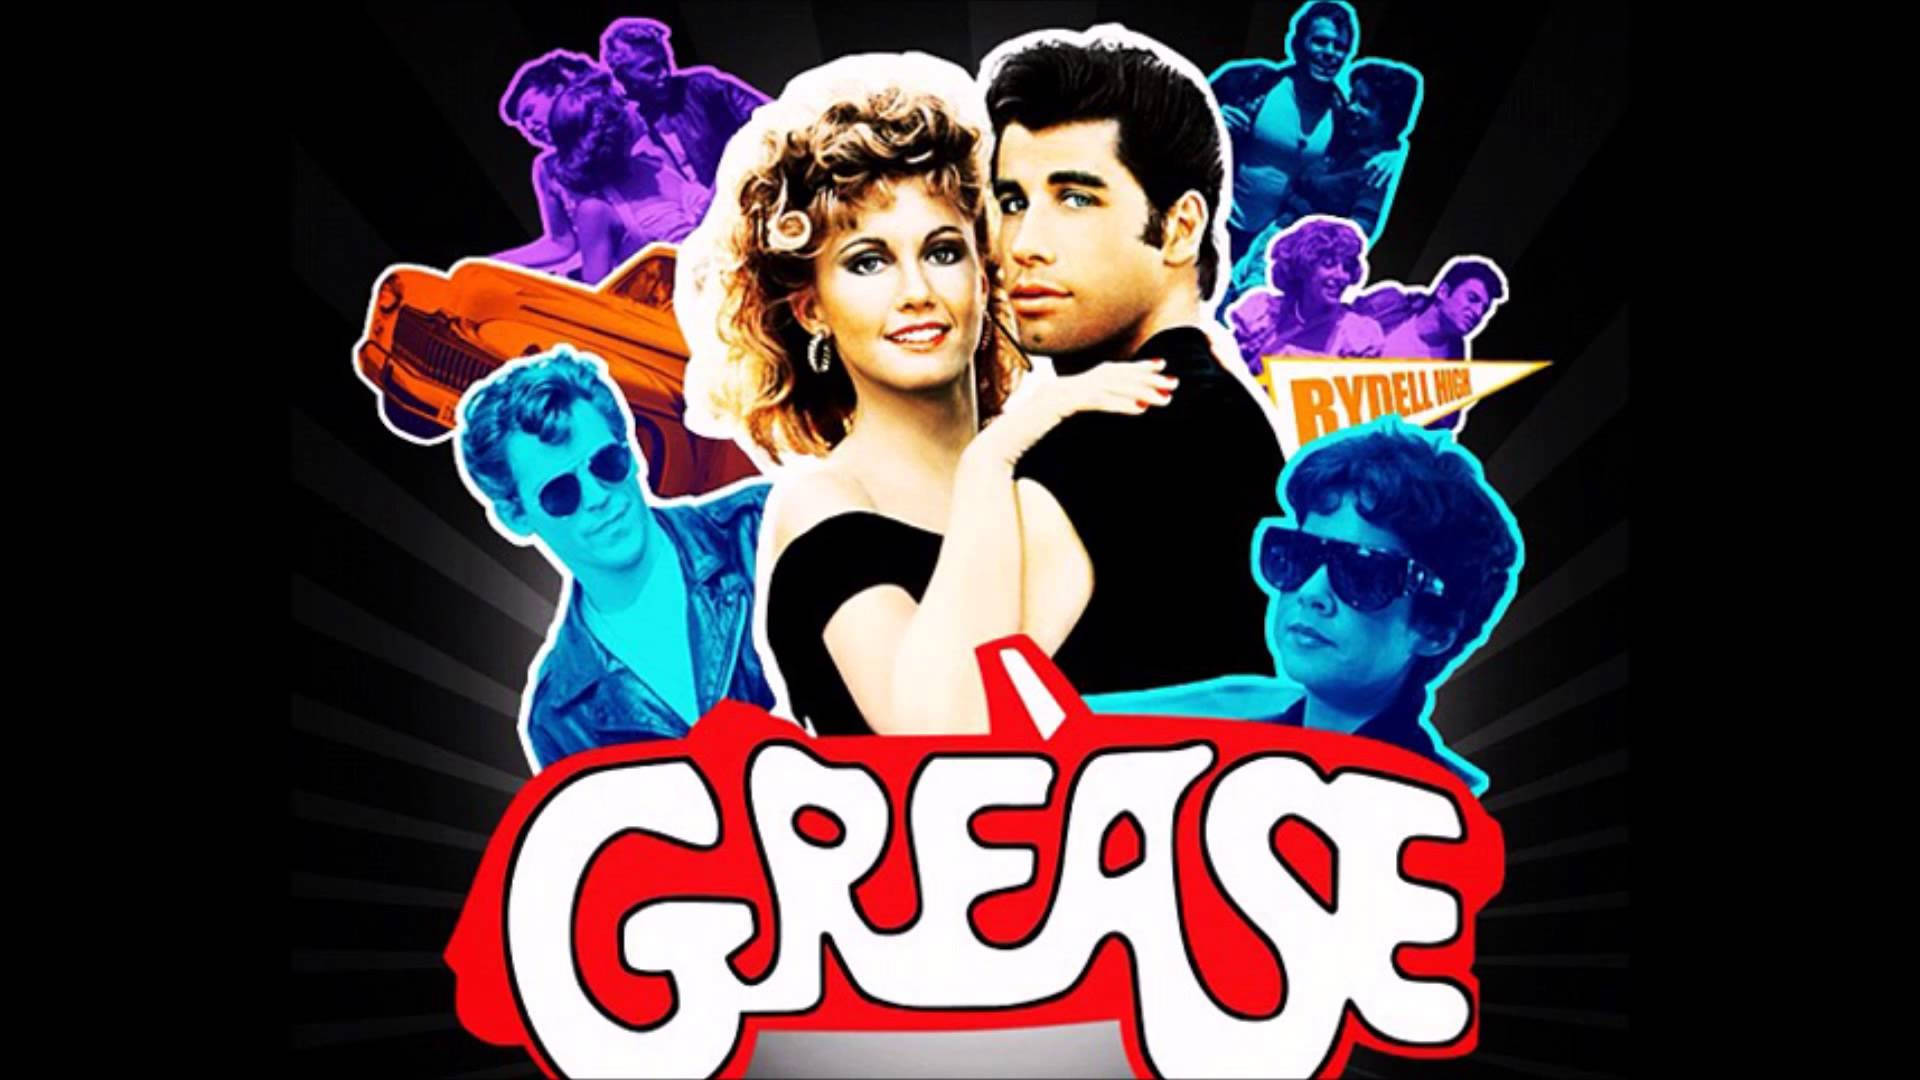 Grease Poster With John And Olivia Wallpaper